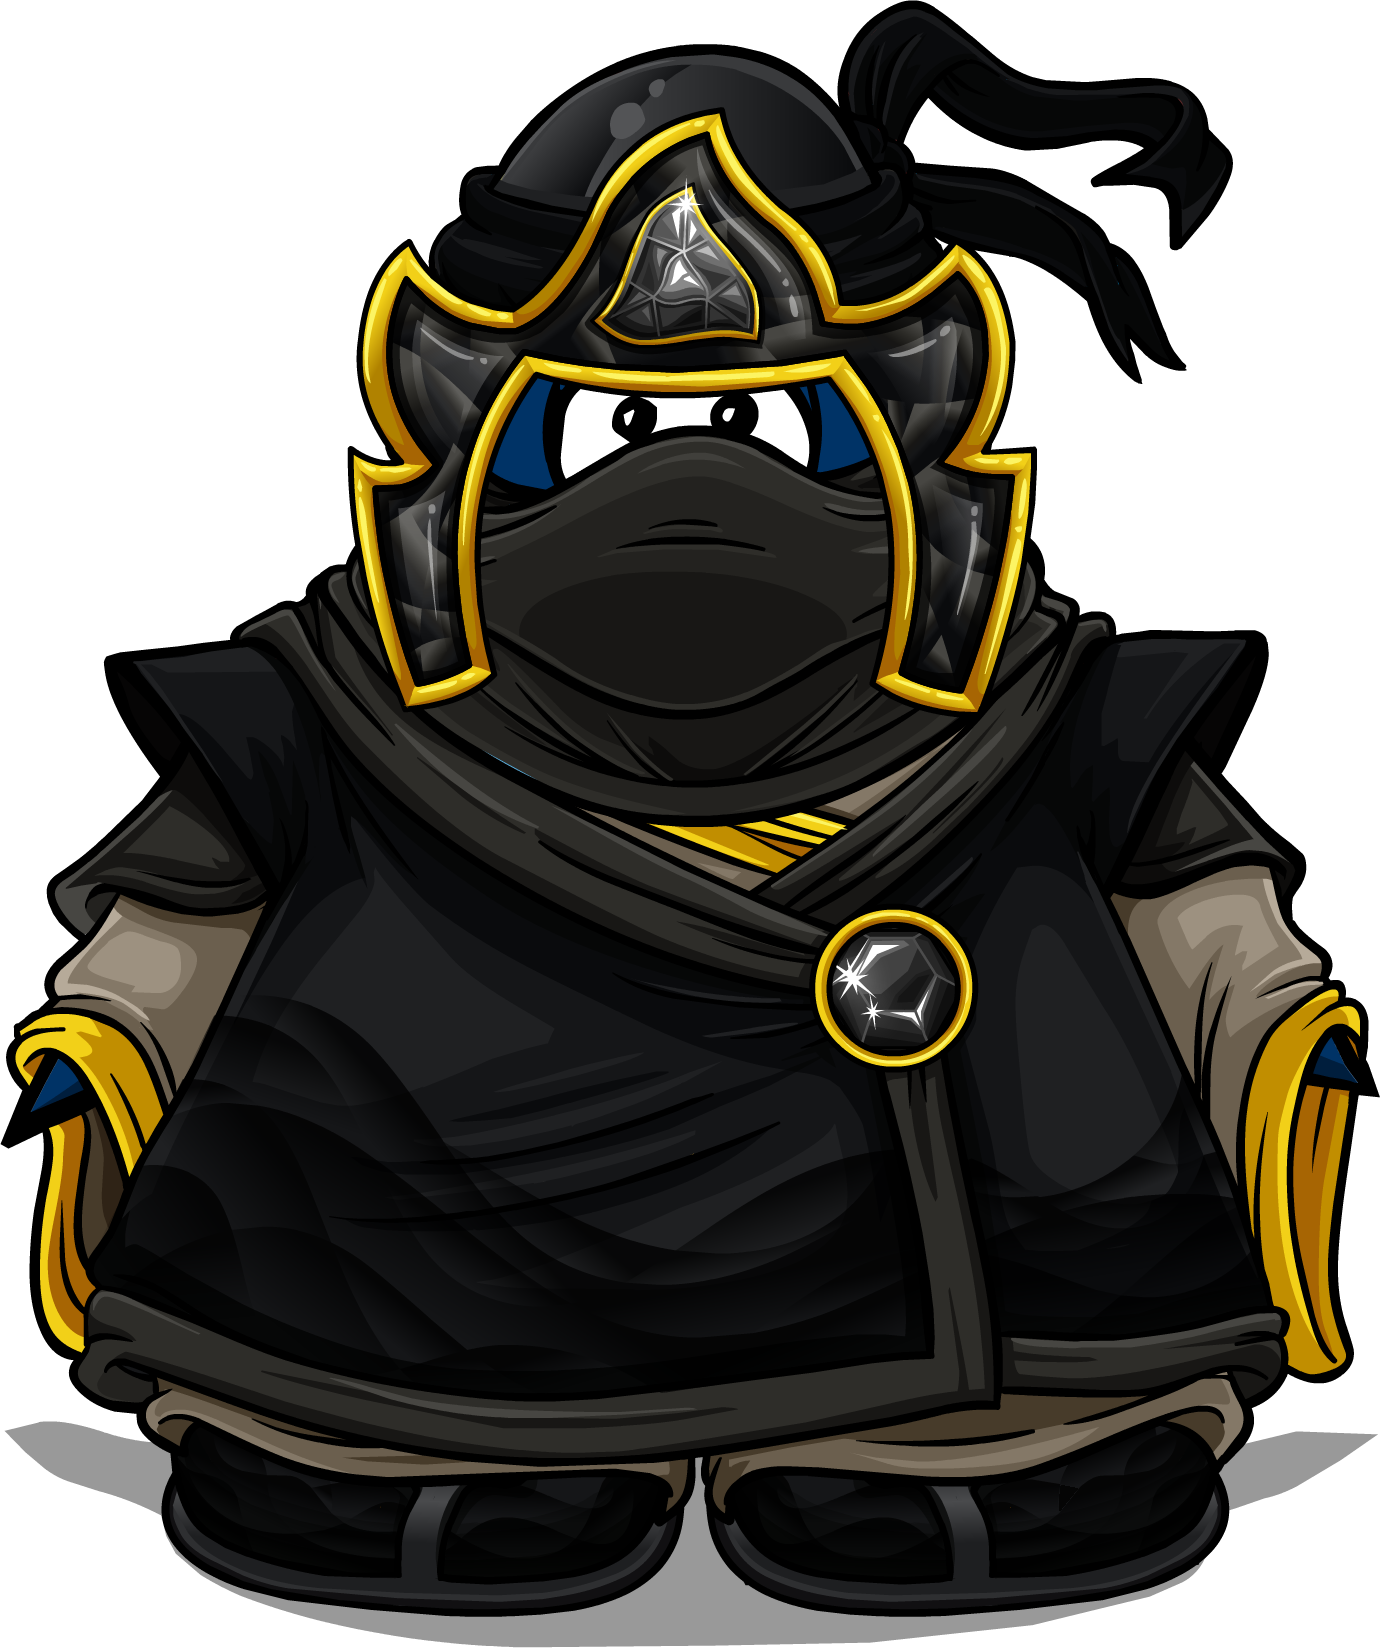 https://static.wikia.nocookie.net/clubpenguin/images/f/fc/Shadow_Suit_on_a_Player_Card.png/revision/latest?cb=20161031165507